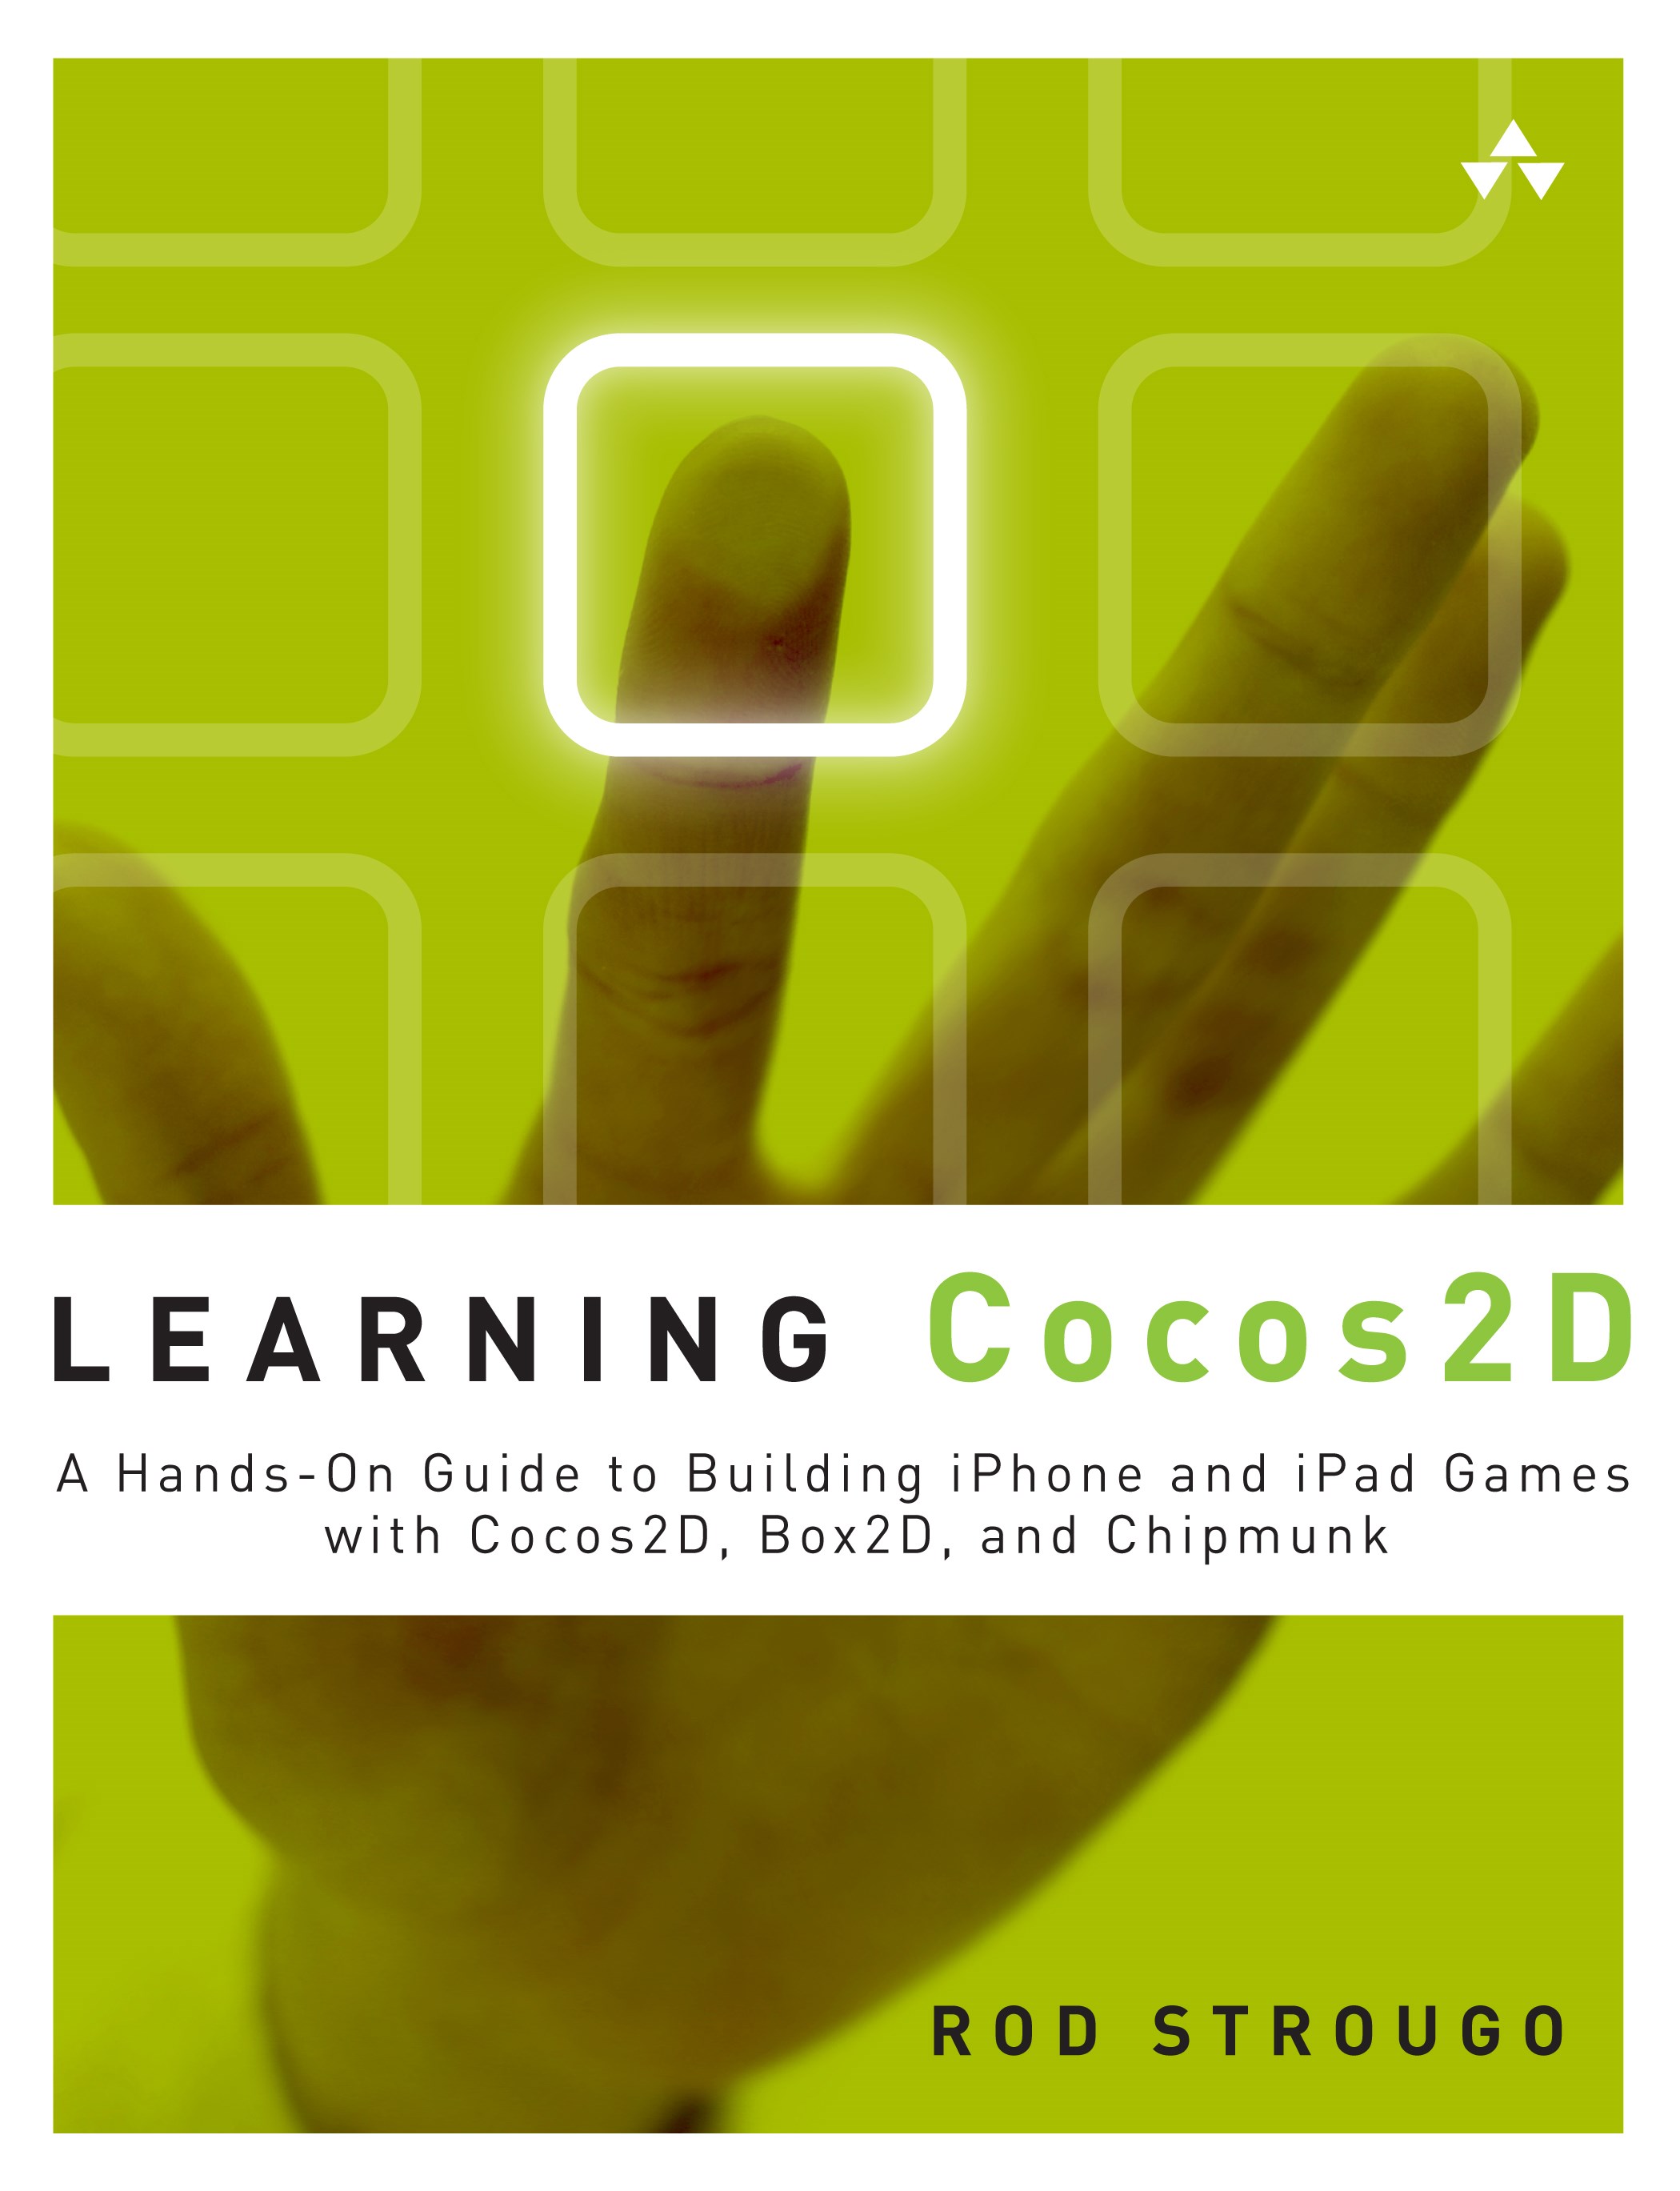 Learning Cocos2D: A Hands-On Guide to Building iOS Games with Cocos2D, Box2D, and Chipmunk